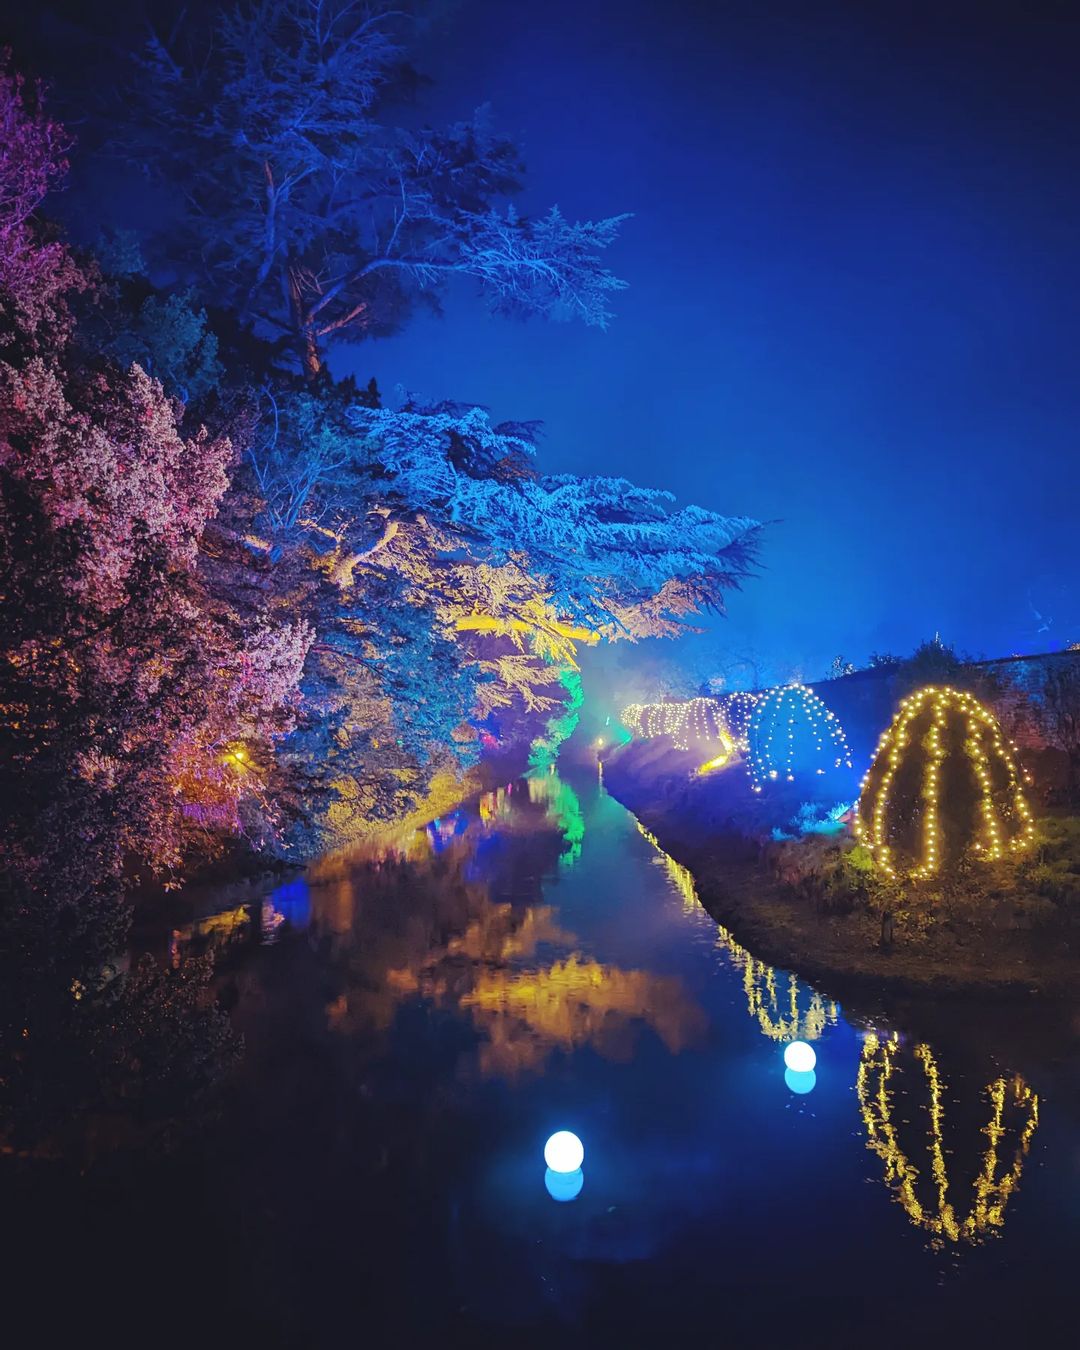 A misty night, looking down a watery moat where either side trees and bushes are lit up in pastel colours. The water is still and there are lit reflections, plus two illuminated floating white balls.